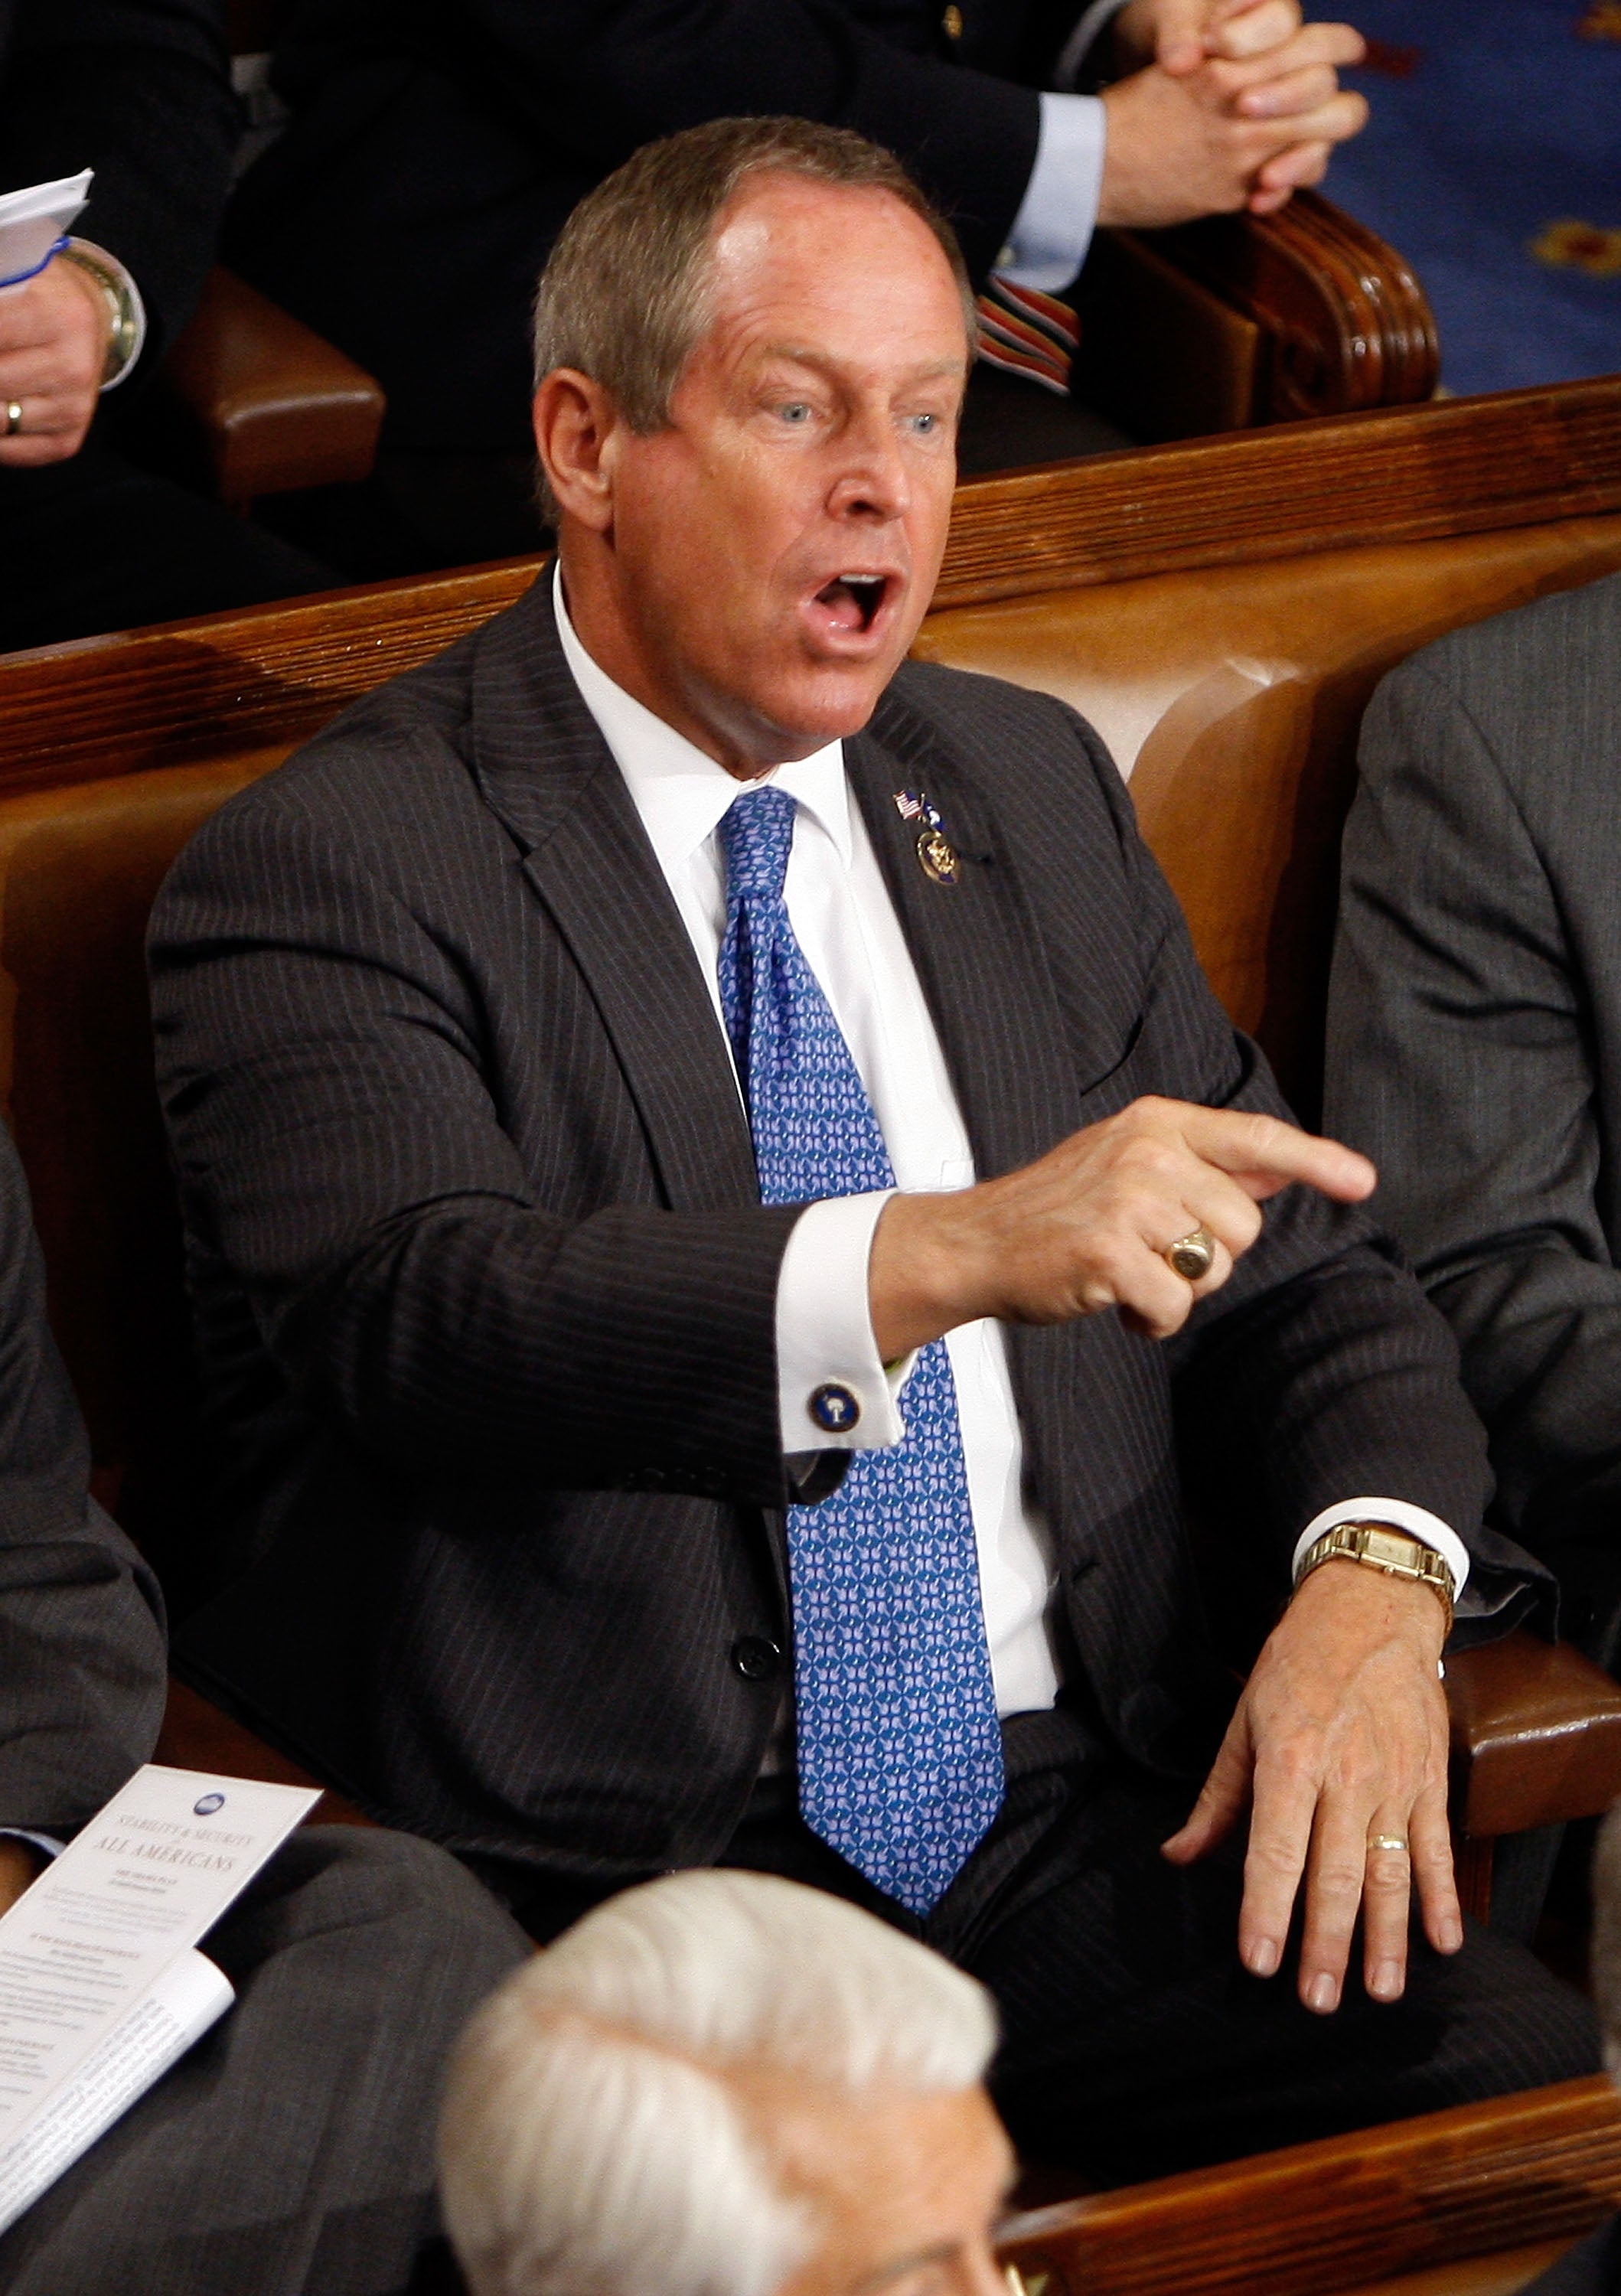 Rep. Joe Wilson (R-SC) shouts "You Lie" as U.S. President Barack Obama addresses a joint session of the U.S. Congress at the U.S. Capitol September 9, 2009 in Washington, DC